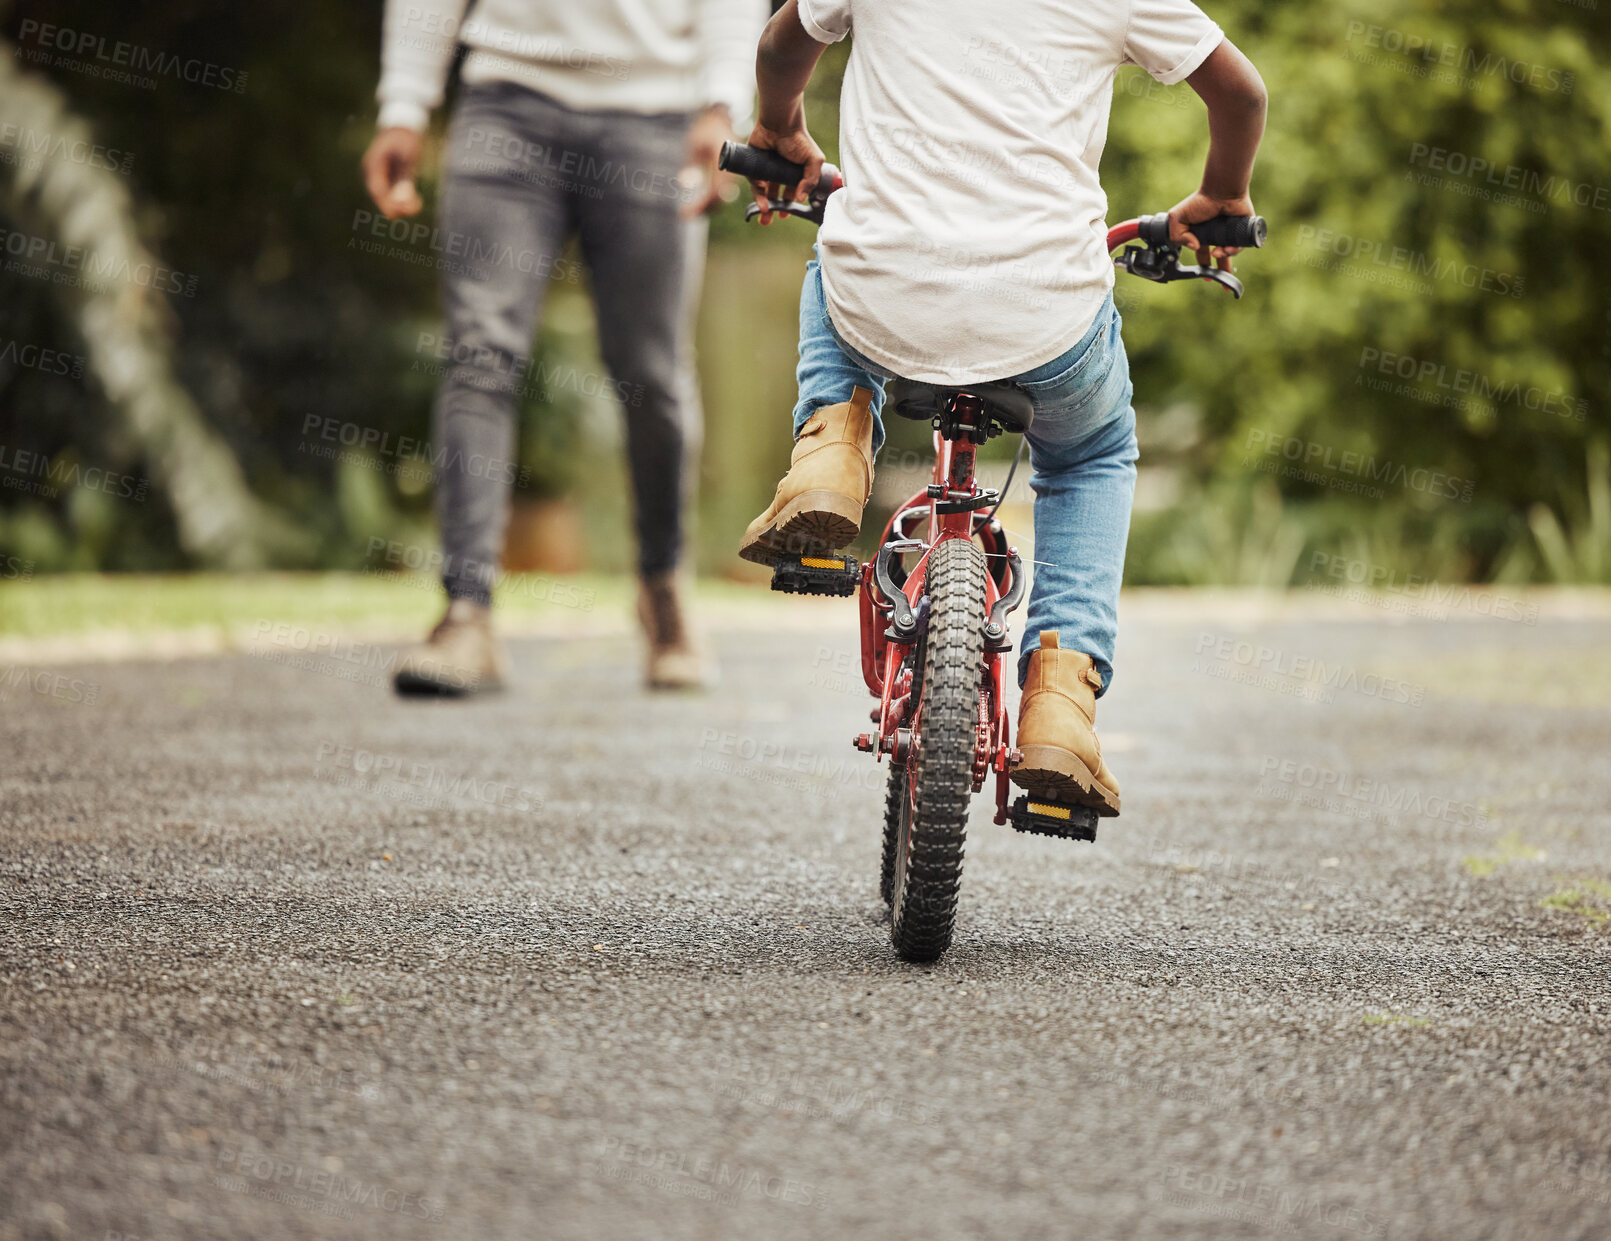 Buy stock photo Cropped shot of a boy learning to ride a bicycle with his father outdoors